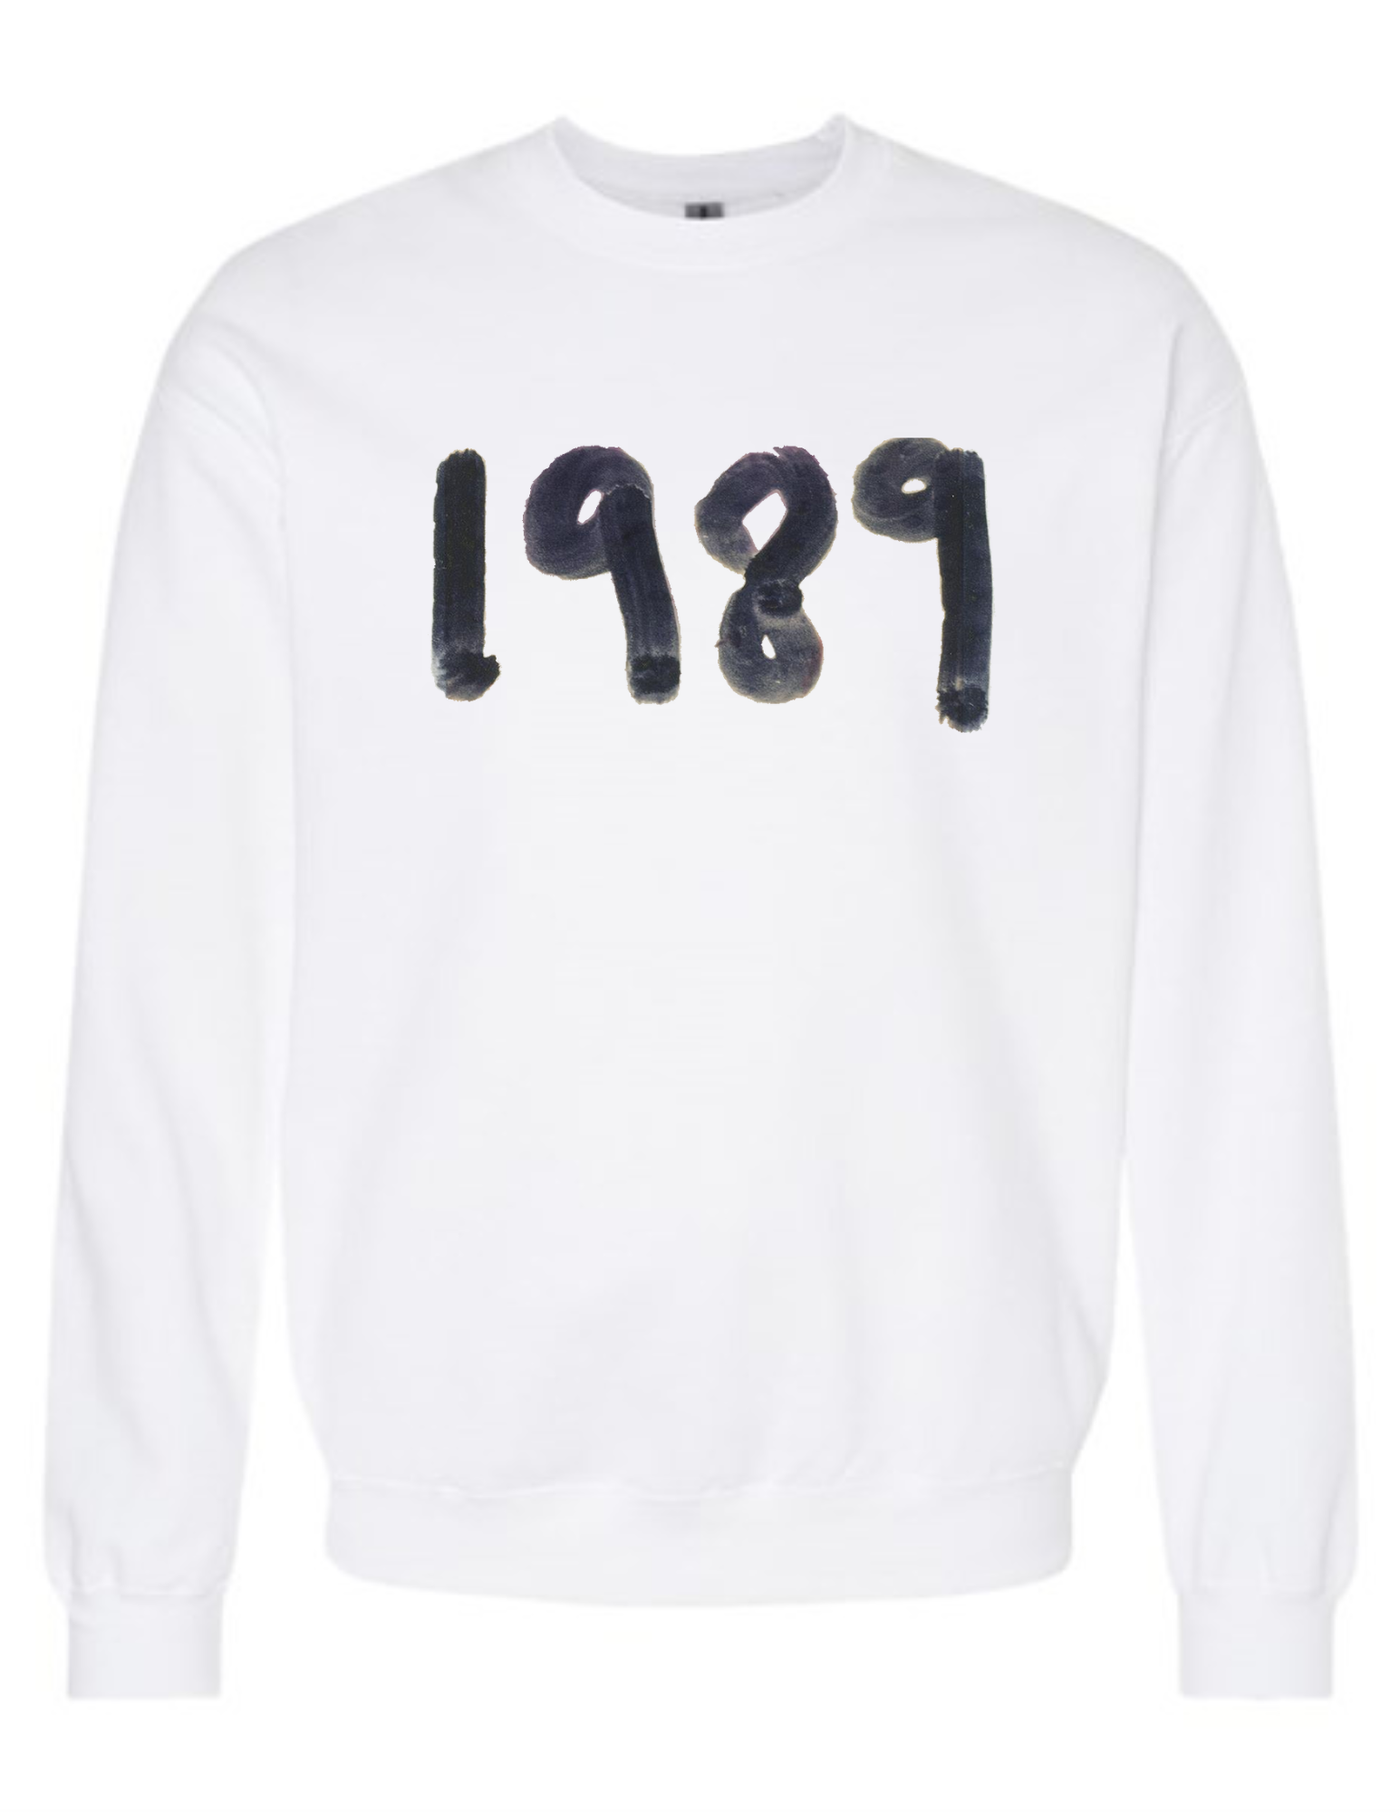 Taylor's 1989 Sweatshirt or T-Shirt | Youth + Adult